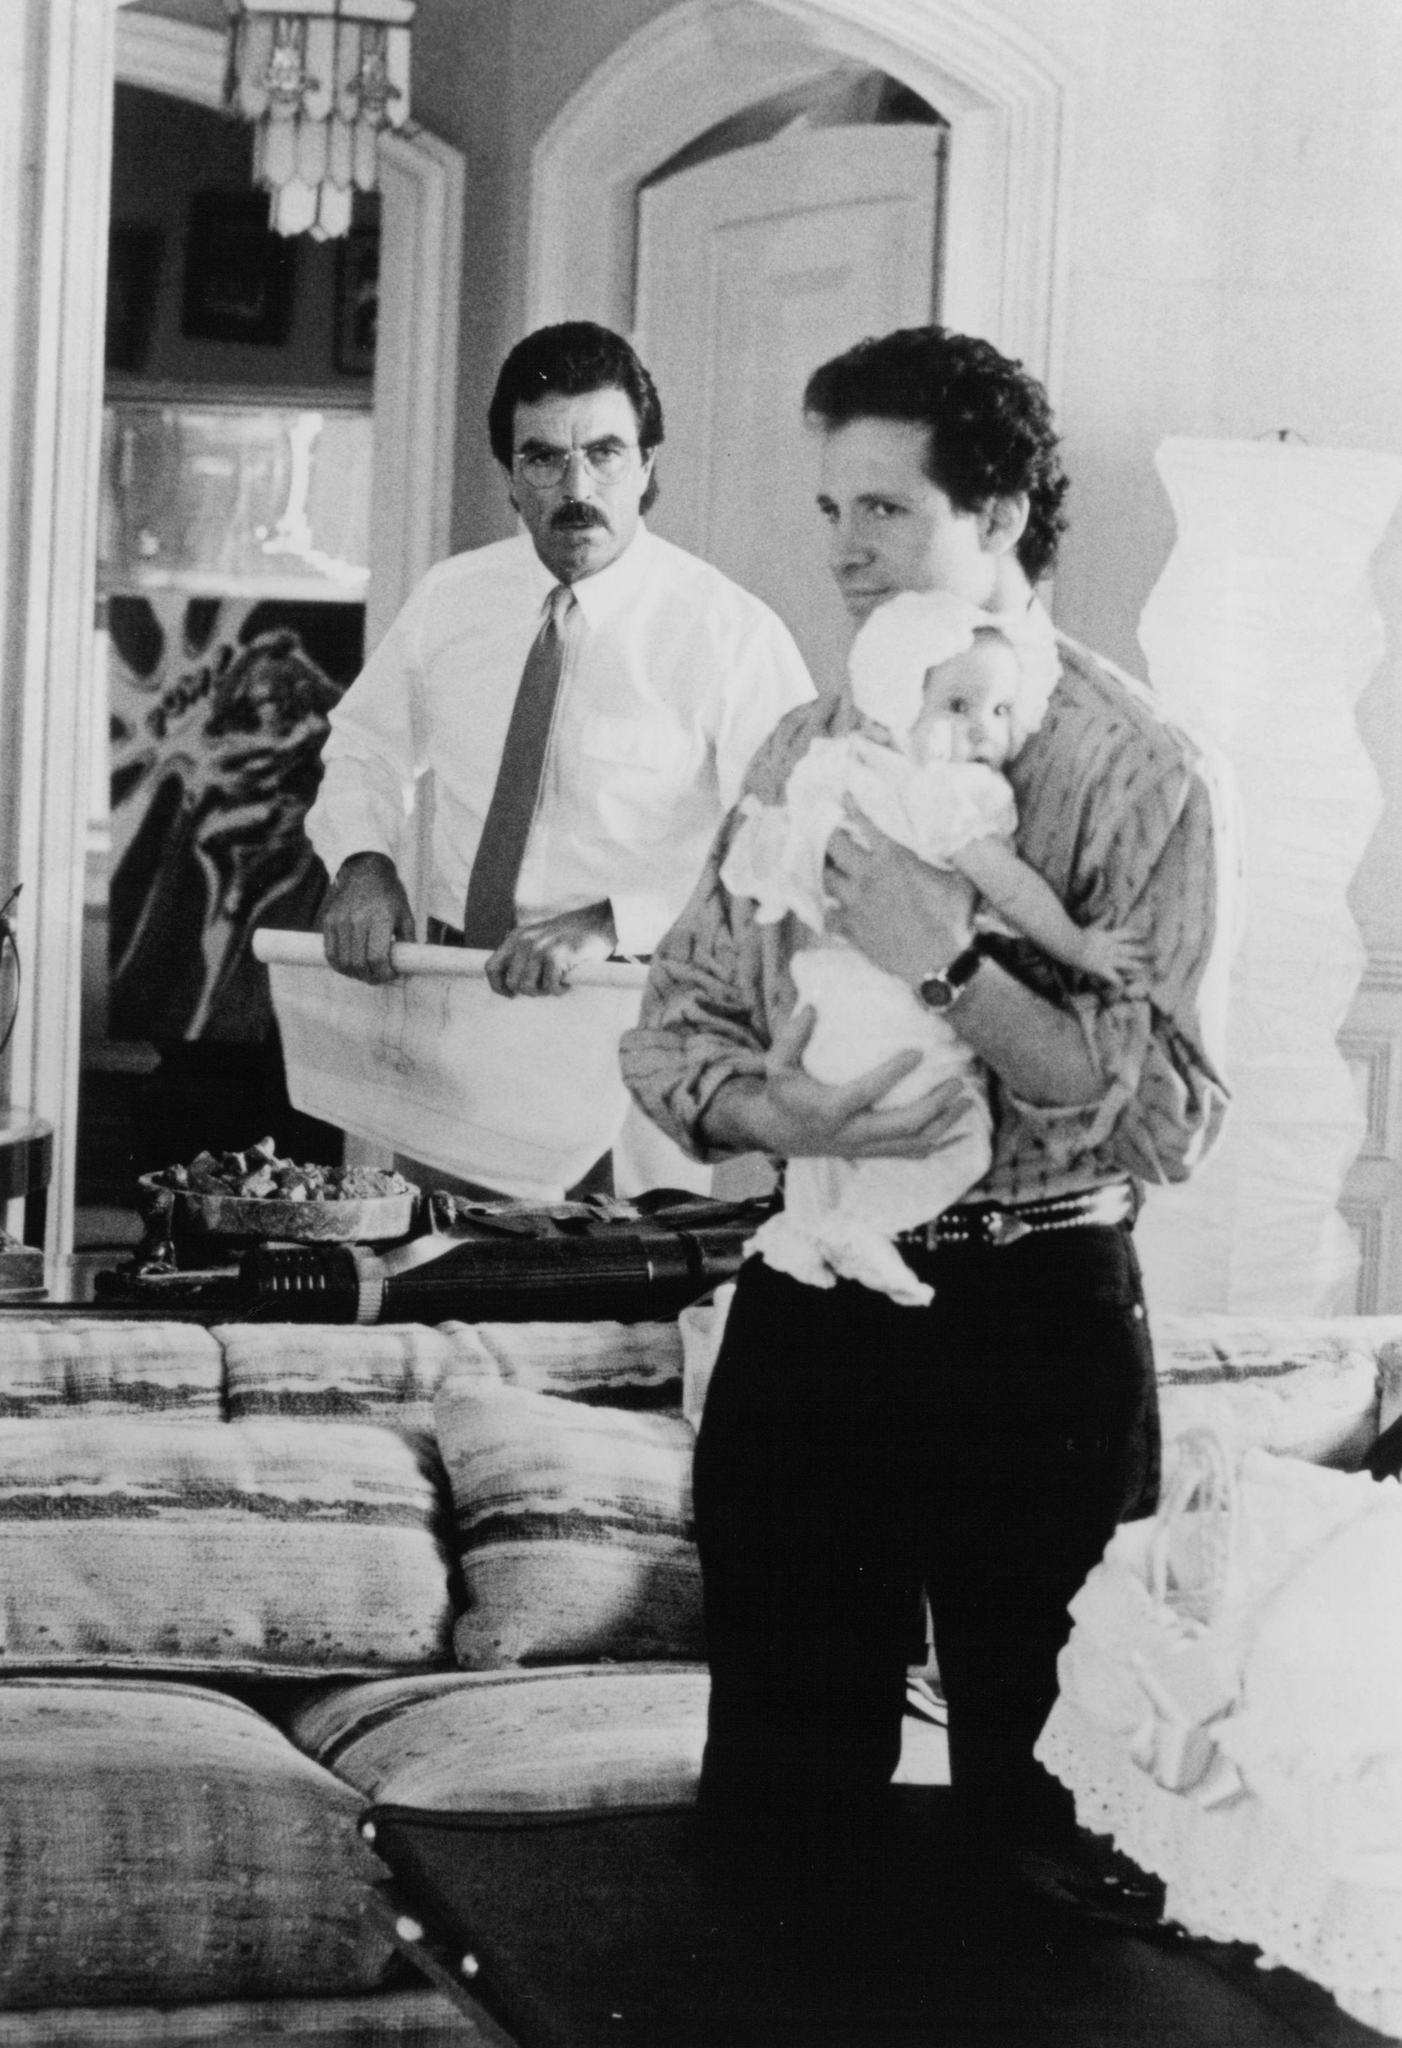 Still of Steve Guttenberg and Tom Selleck in 3 Men and a Baby (1987)